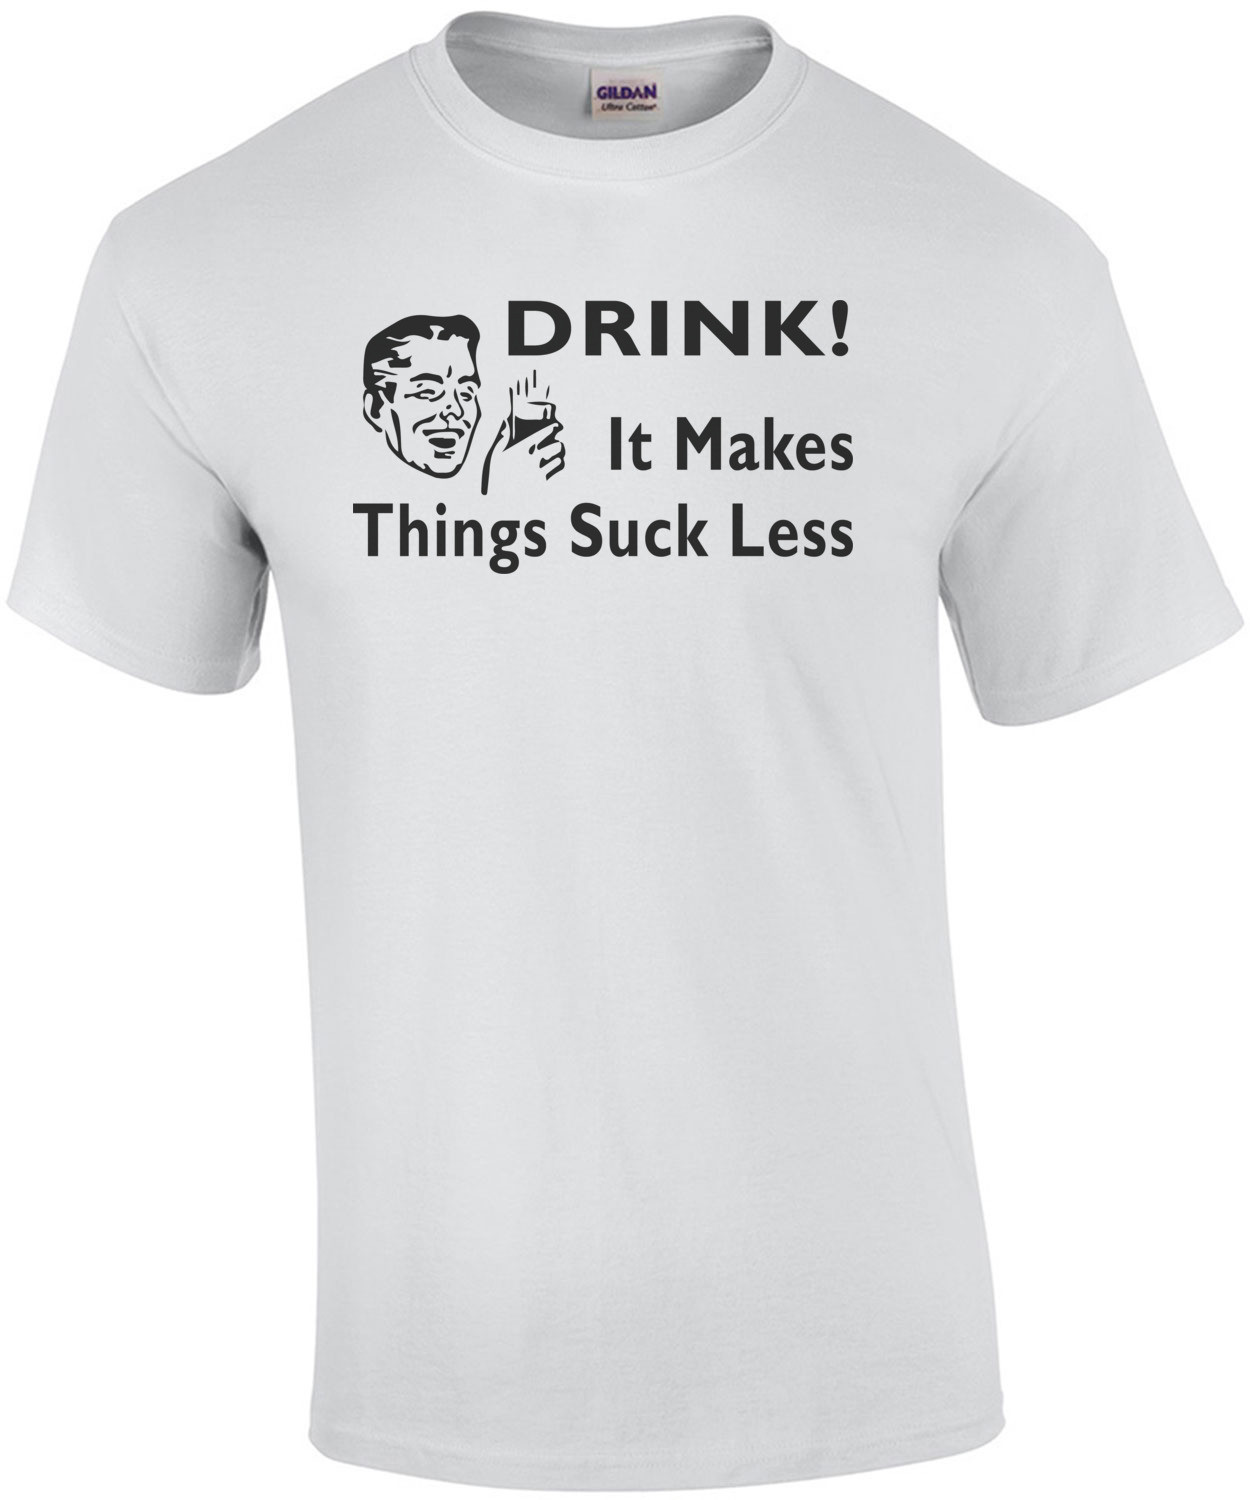 Drink It Makes Things Suck Less - Drinking T-Shirt